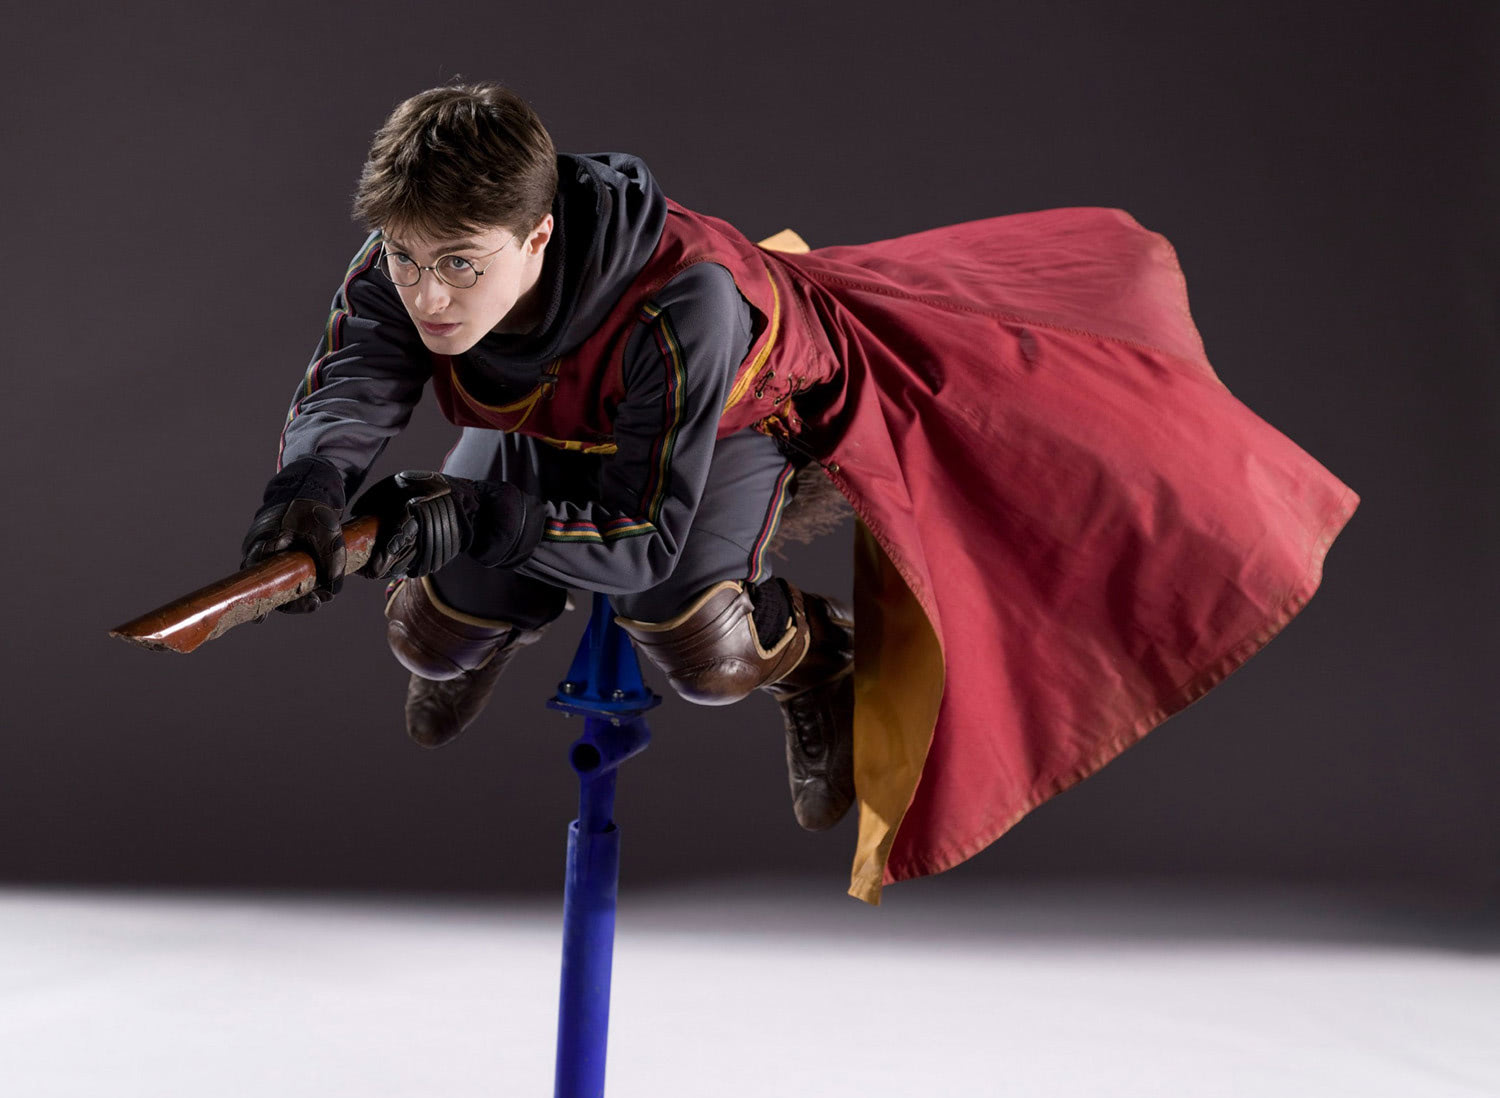 Portrait of Harry Potter in Quidditch robes